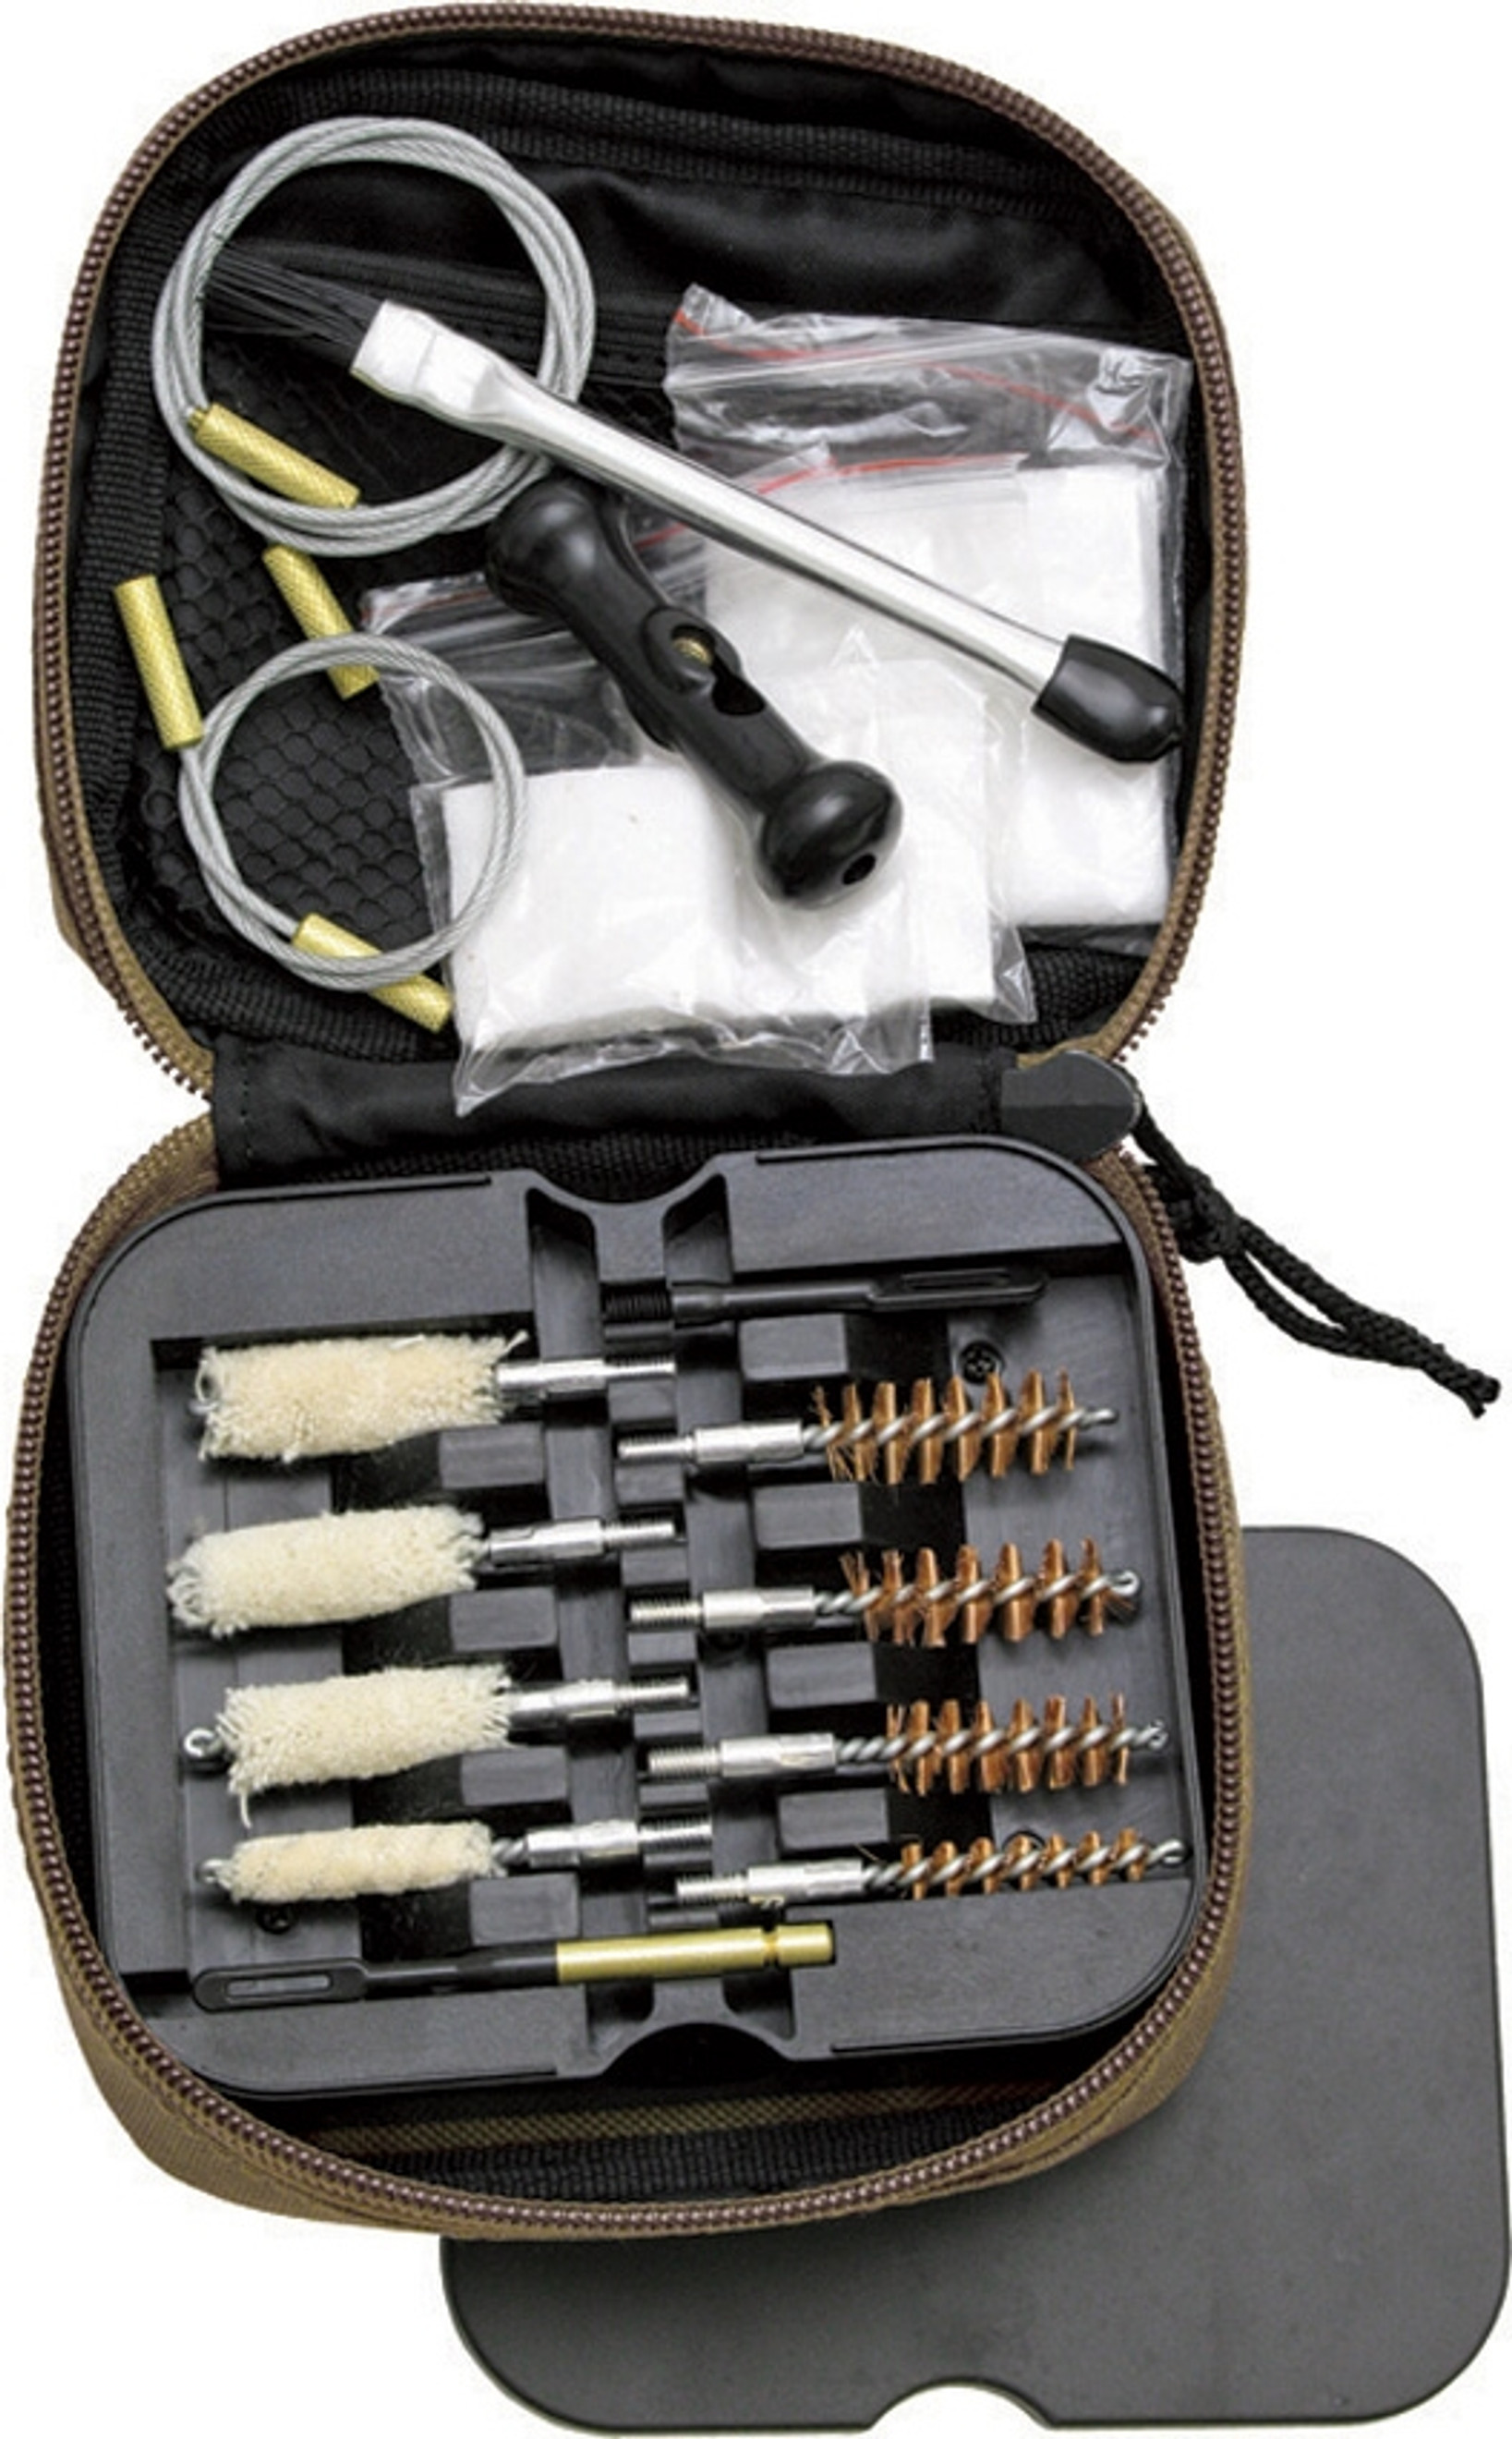 Portable Pistol Cleaning Kit AB0034T